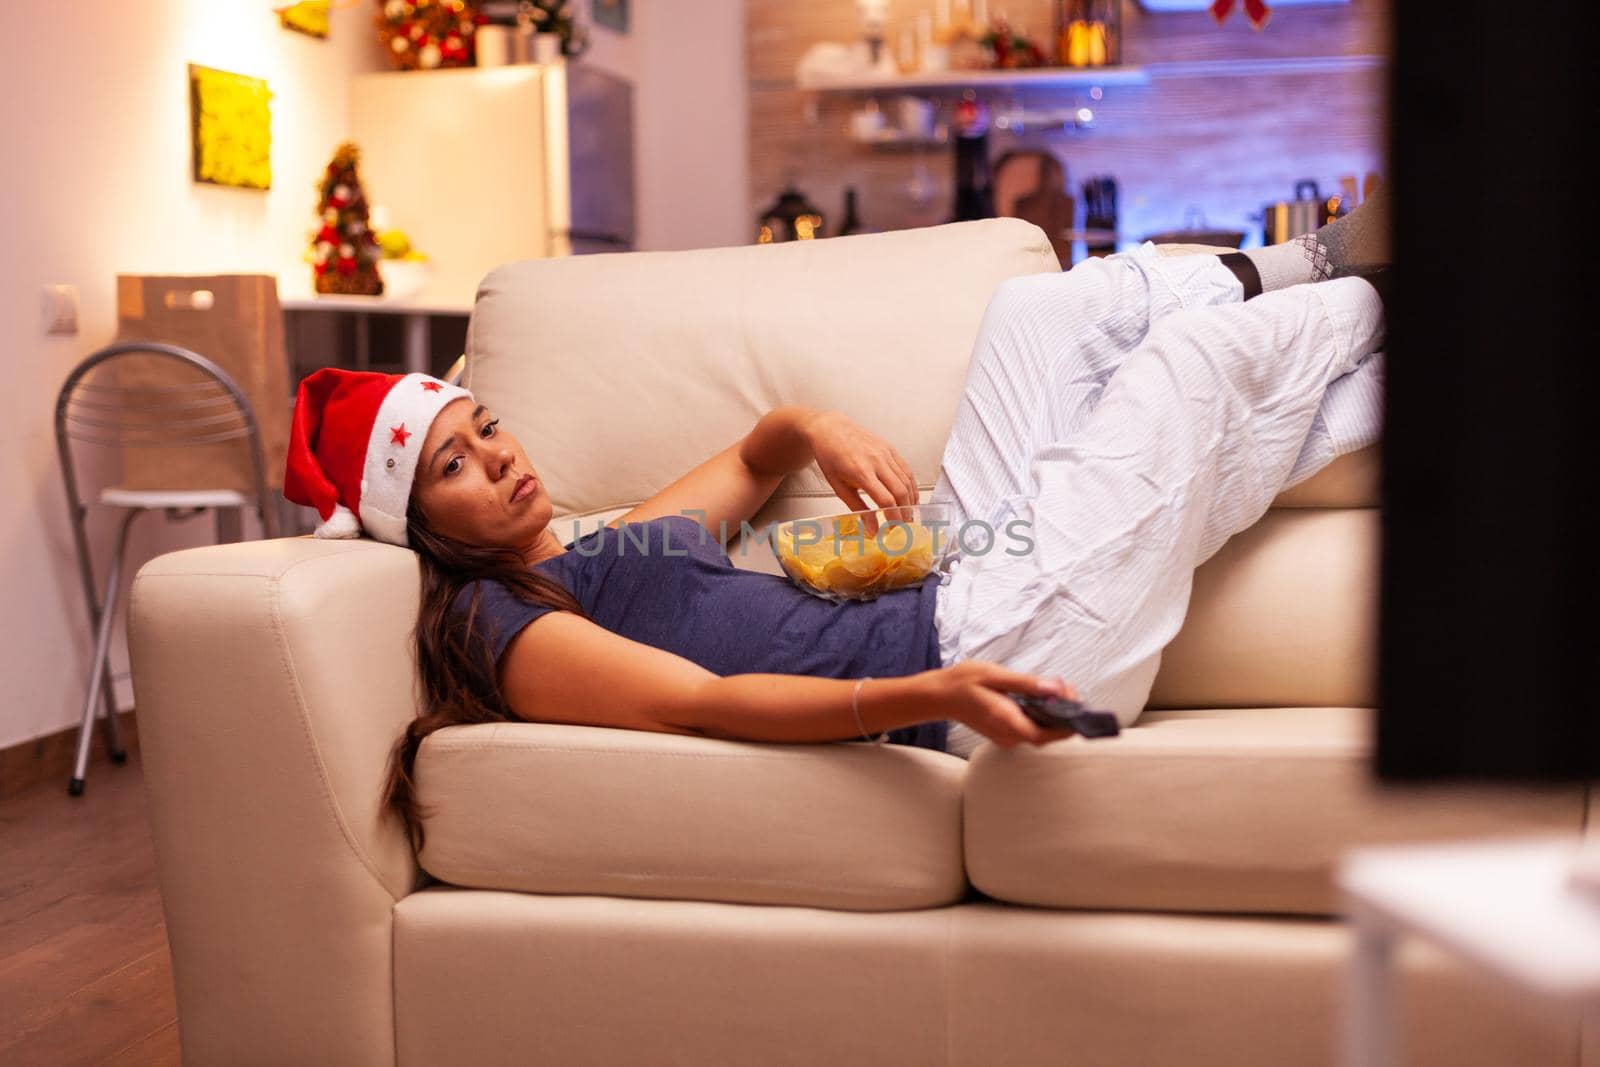 Woman resting on couch eating snacks while searching winter movie on television using remote control enjoying december season. Caucasian female celebrating christmas holiday in xmas decorated kitchen